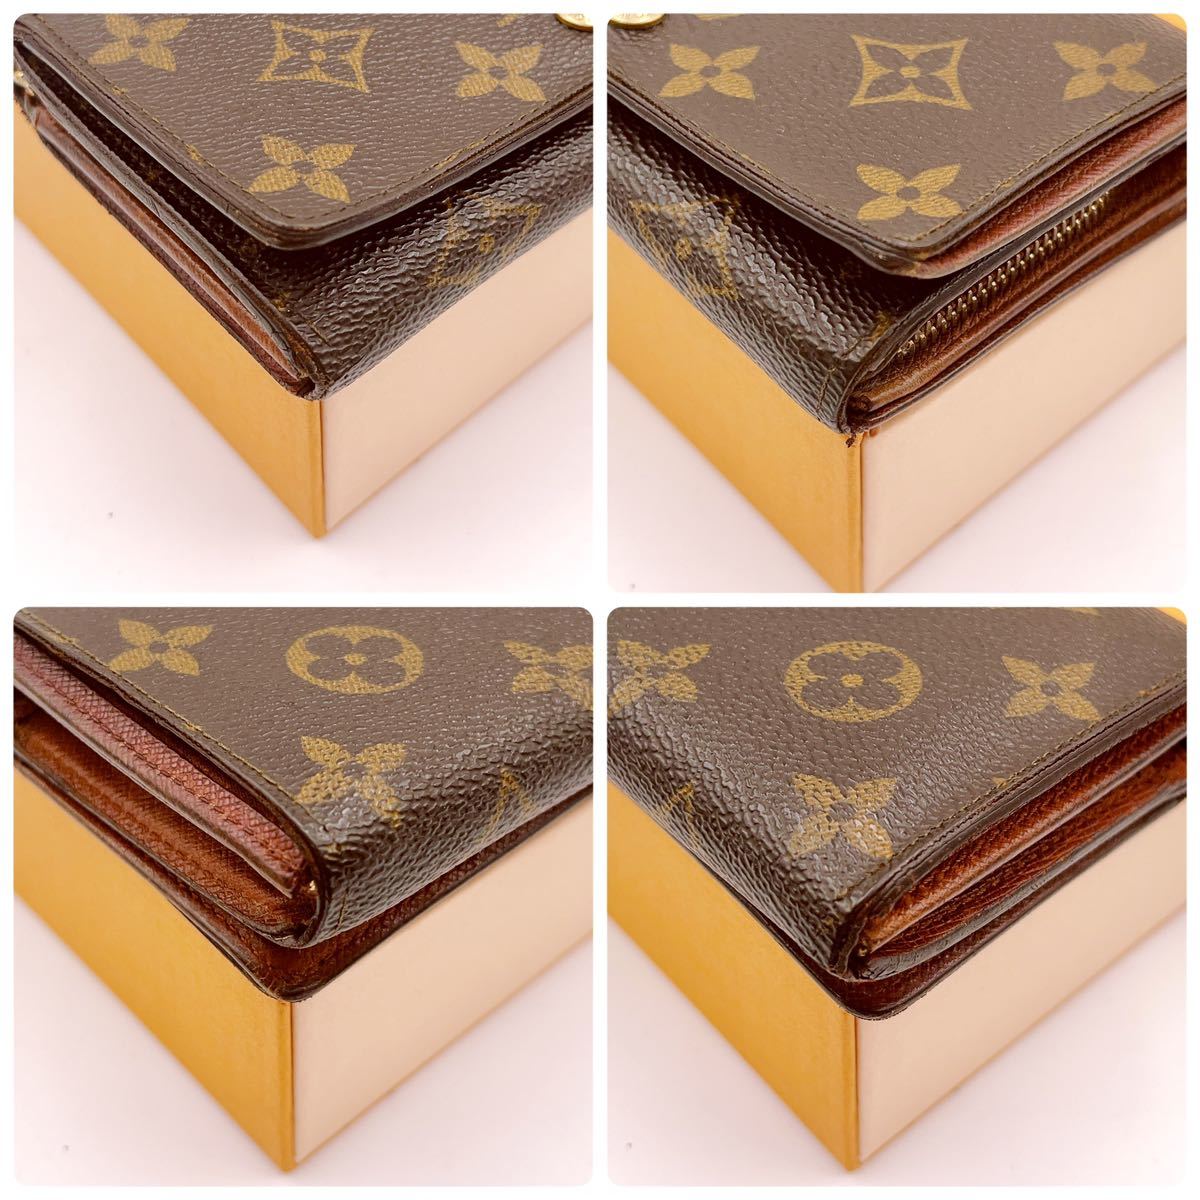 A23817】☆正規品☆ LOUIS VUITTON ルイヴィトン モノグラム